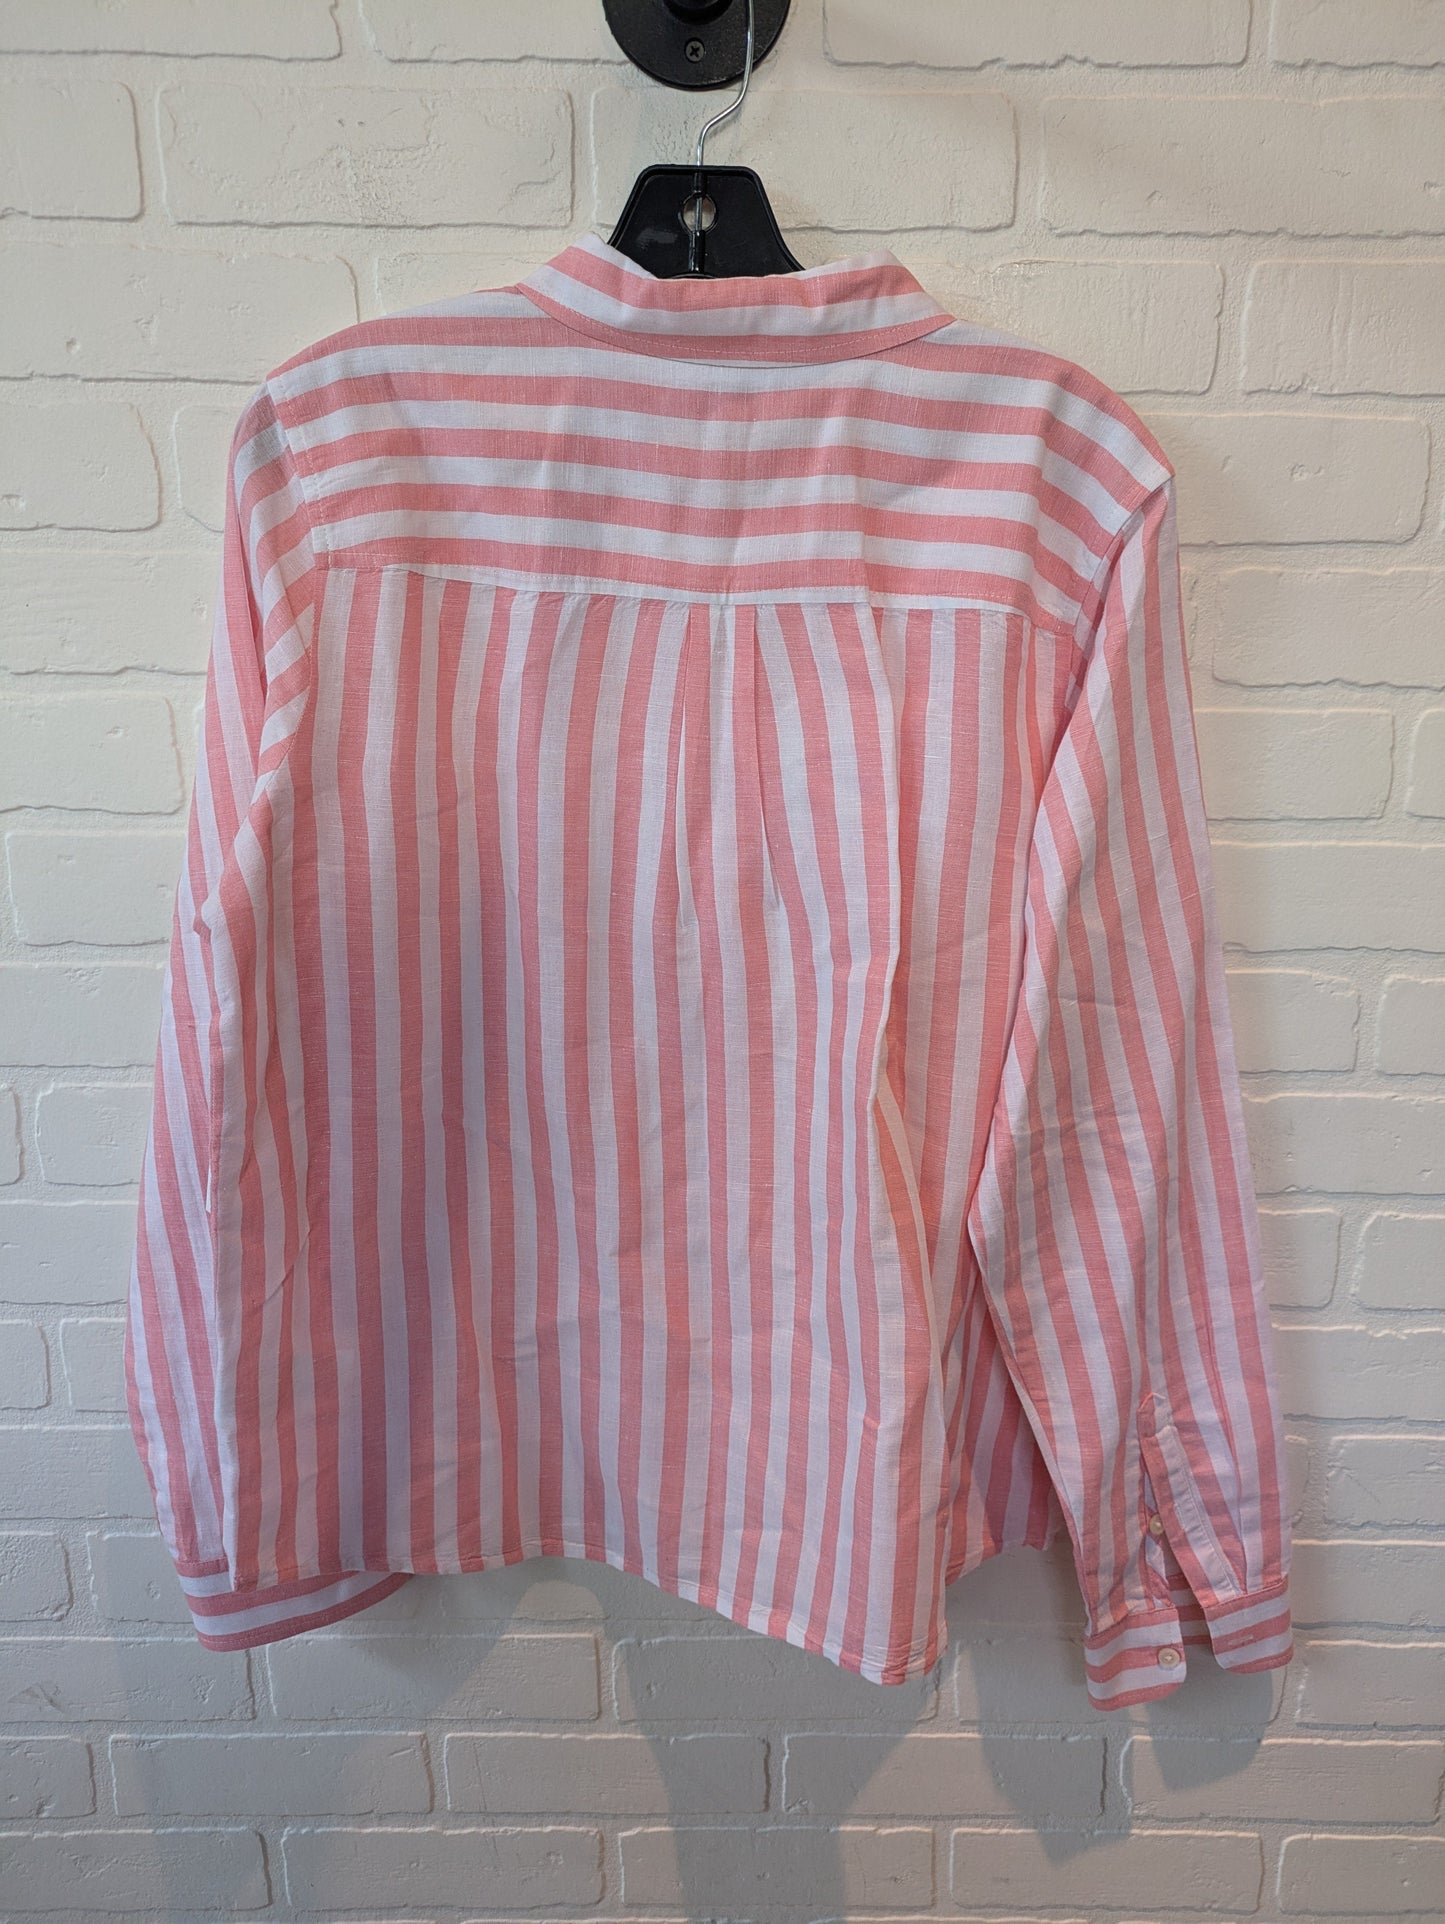 Pink & White Top Long Sleeve J. Crew, Size L